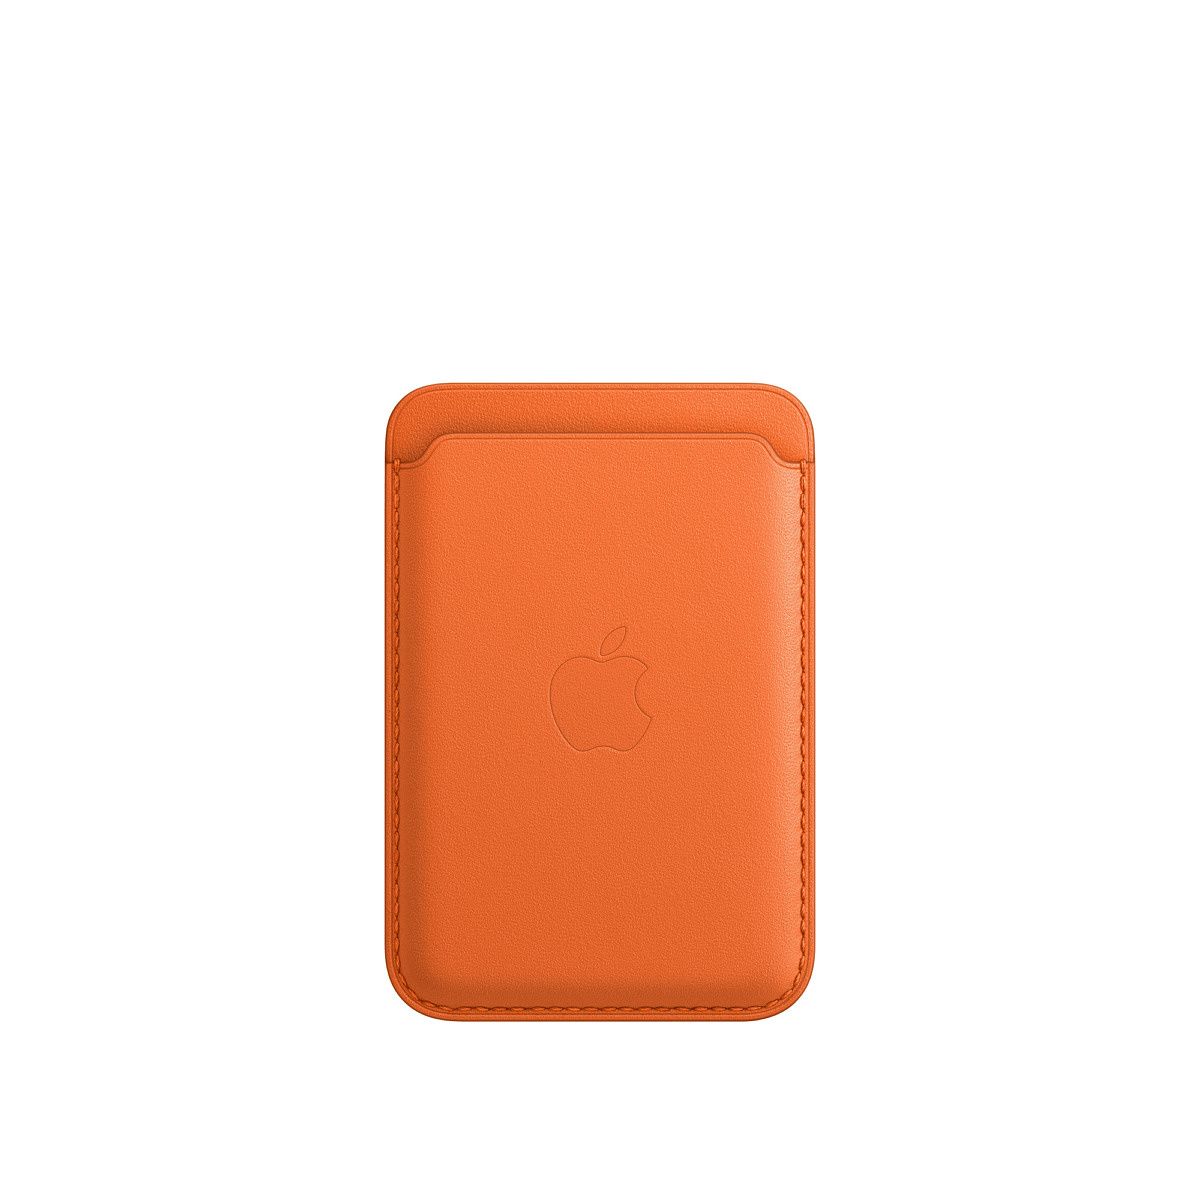 The Apple Leather Wallet is made of specially tanned finished European leather and magnetically attaches to your iPhone using the MagSafe technology. It lets you store your ID, credit cards, and cash without having to carry a physical wallet.